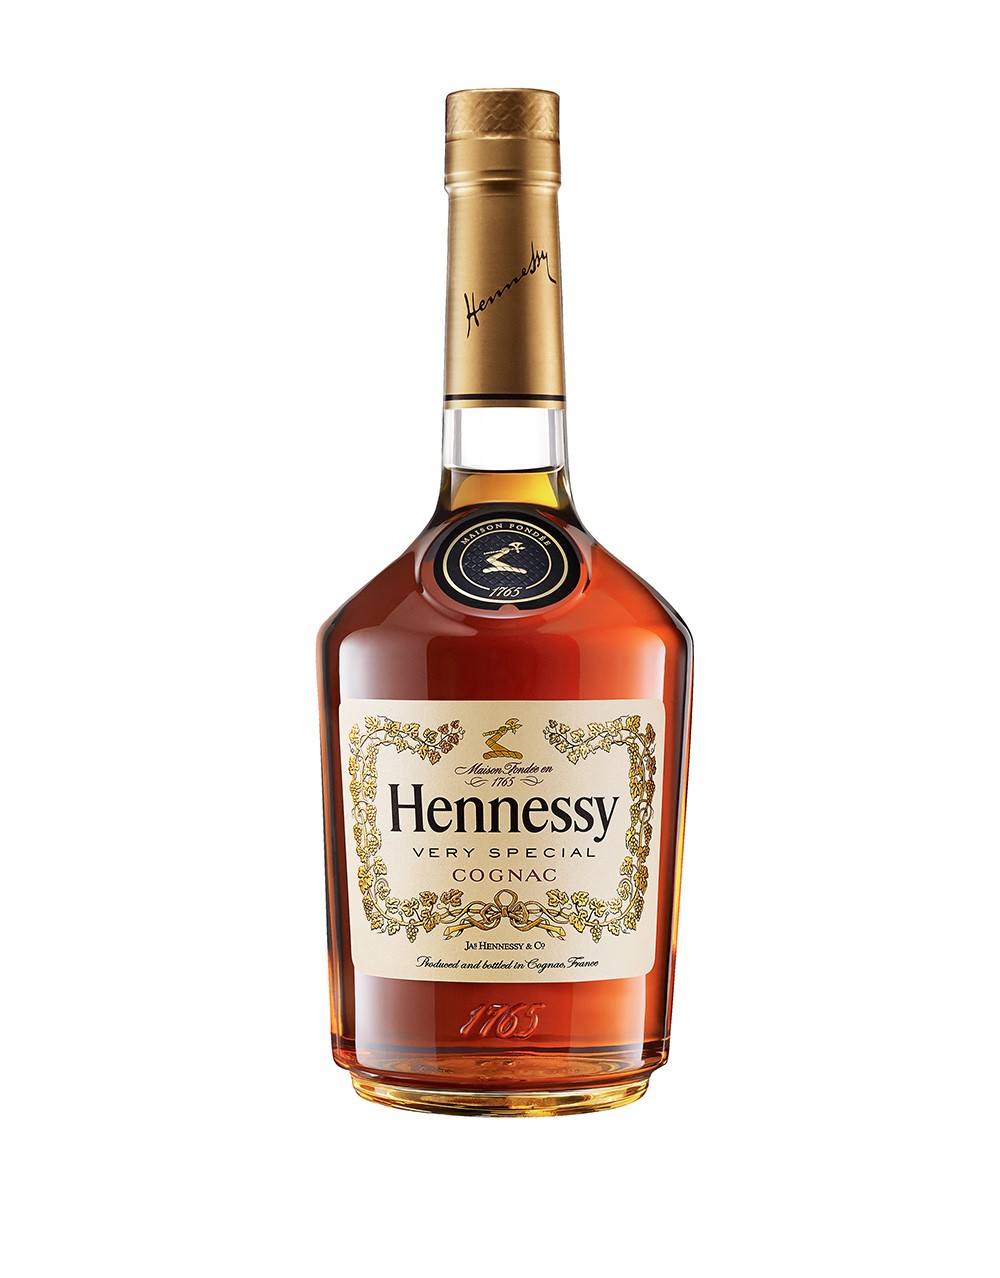 Hennessy V.S Cognac Buy Online or Send as a Gift